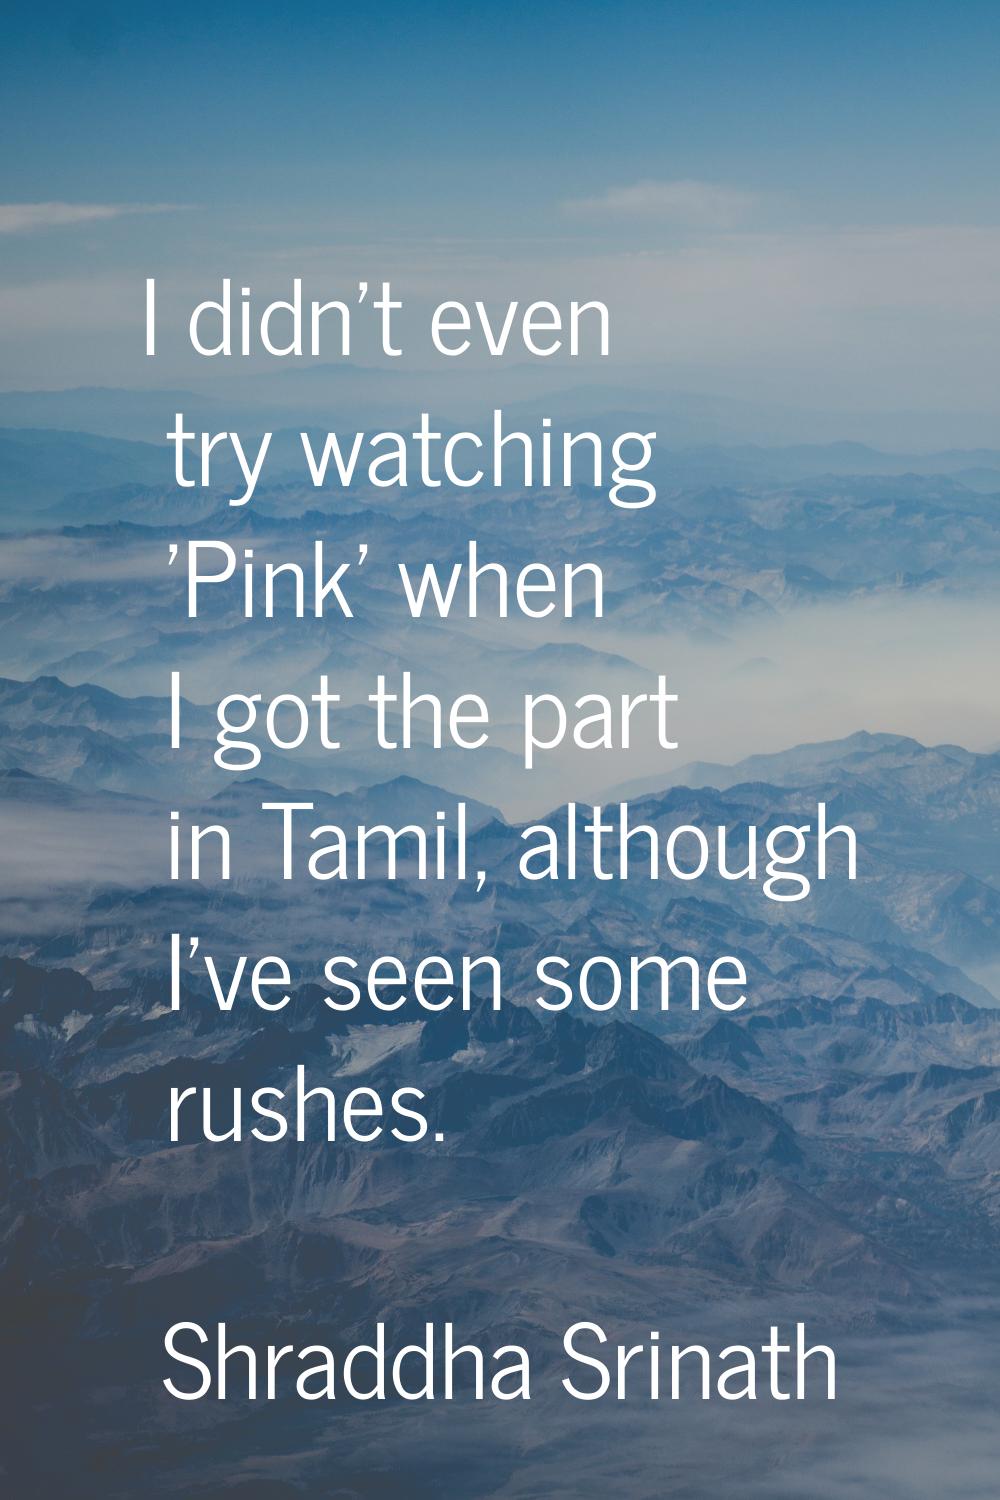 I didn't even try watching 'Pink' when I got the part in Tamil, although I've seen some rushes.